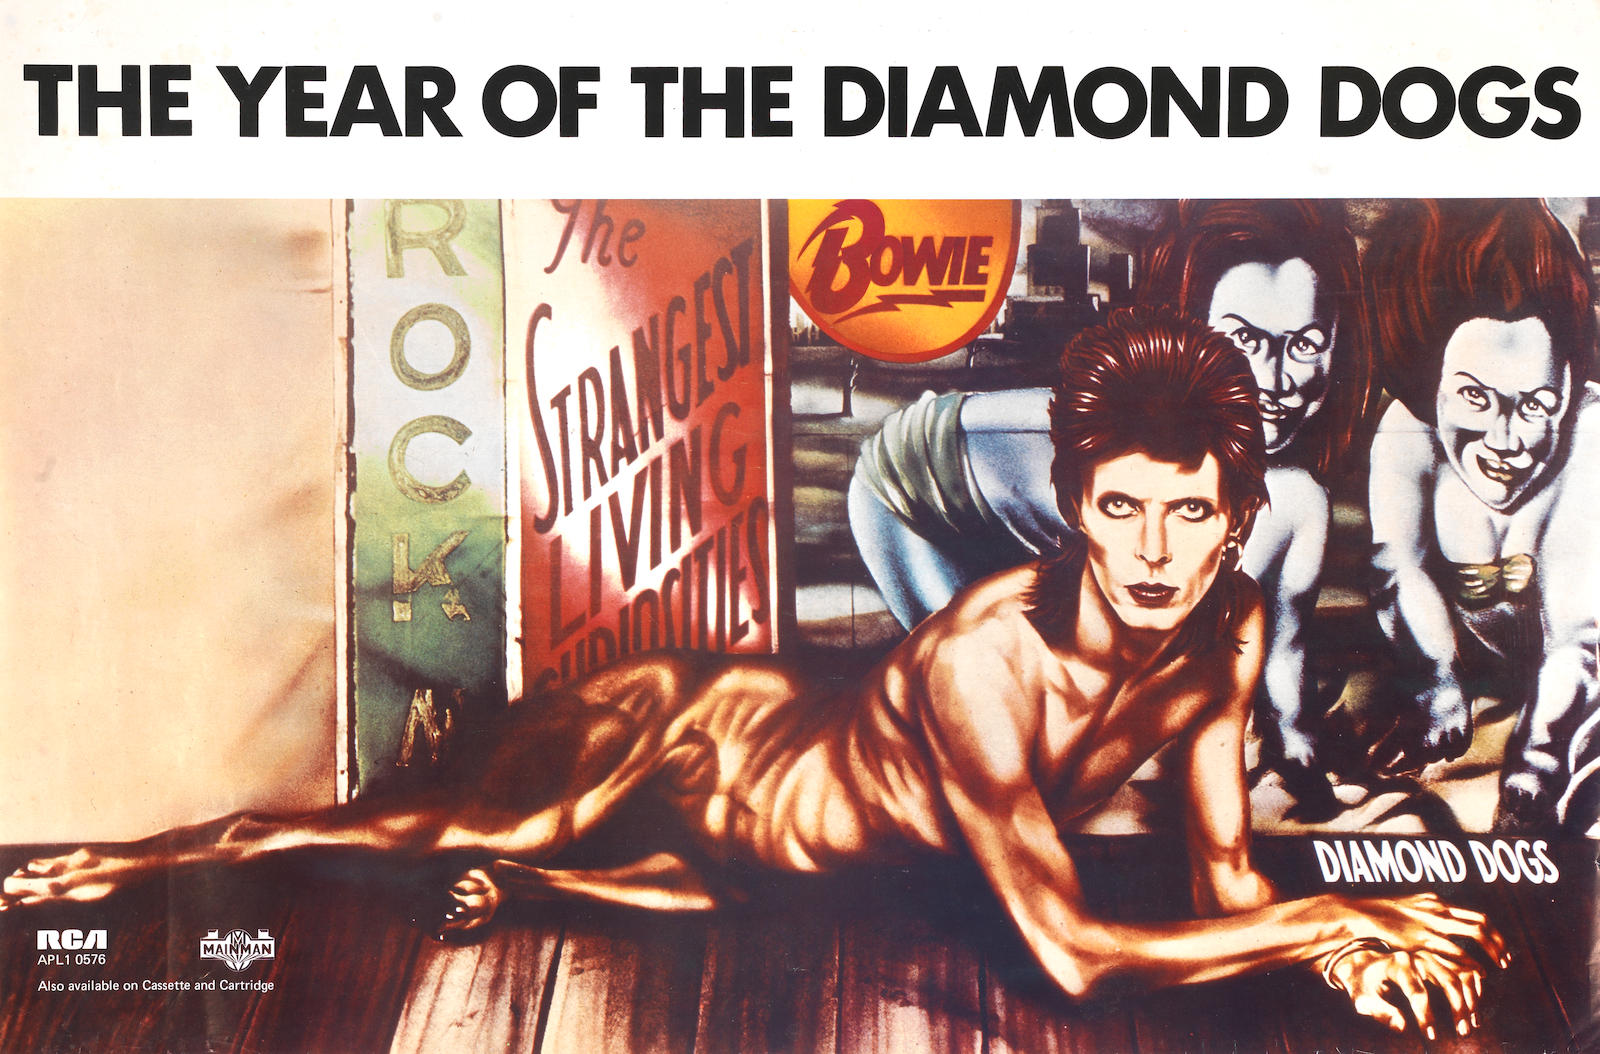 David Bowie Diamond Dogs Promotional Poster 1974 